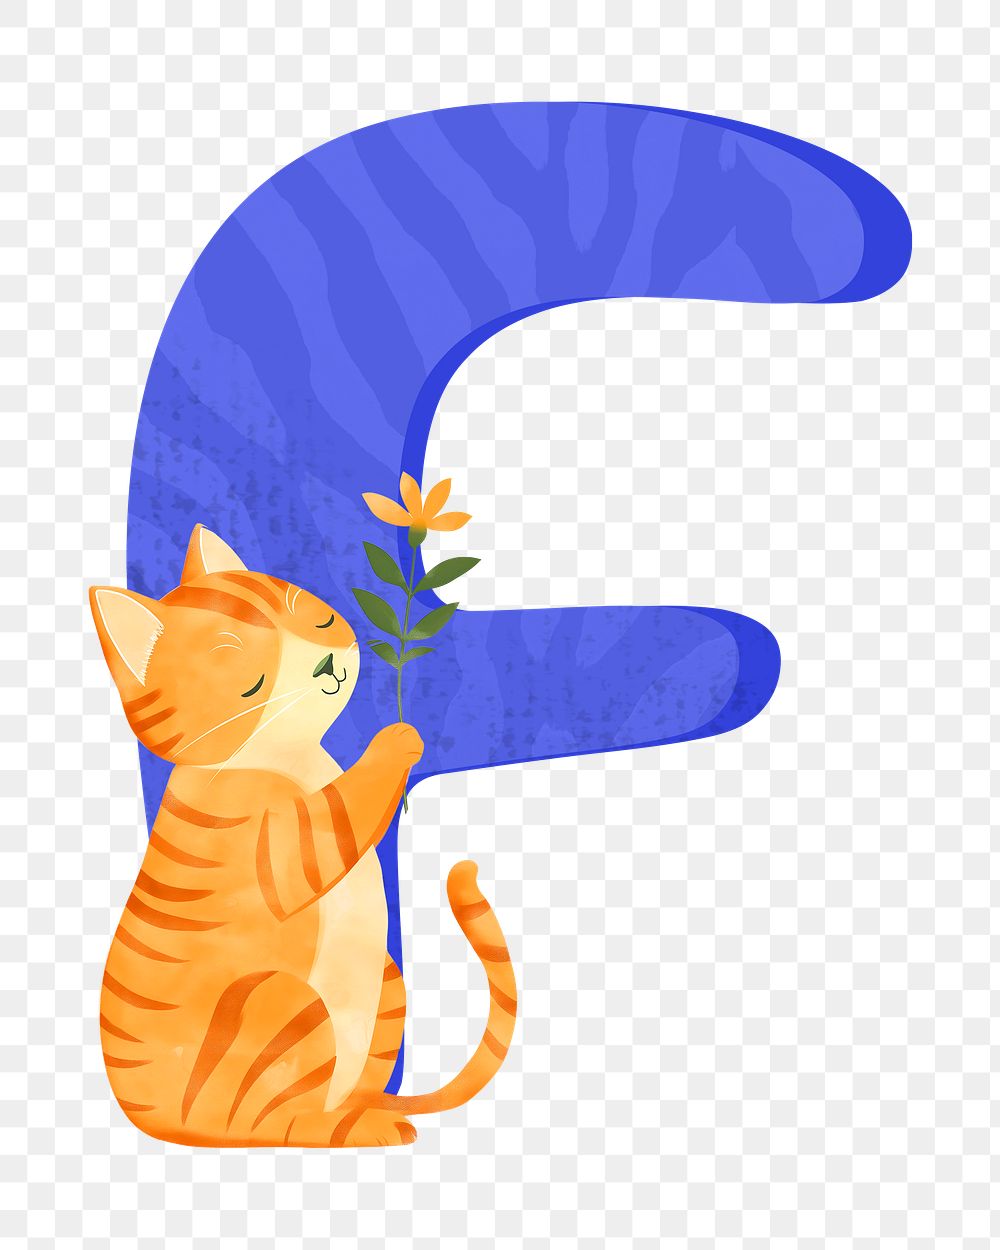 Letter F png in blue with cat character, transparent background